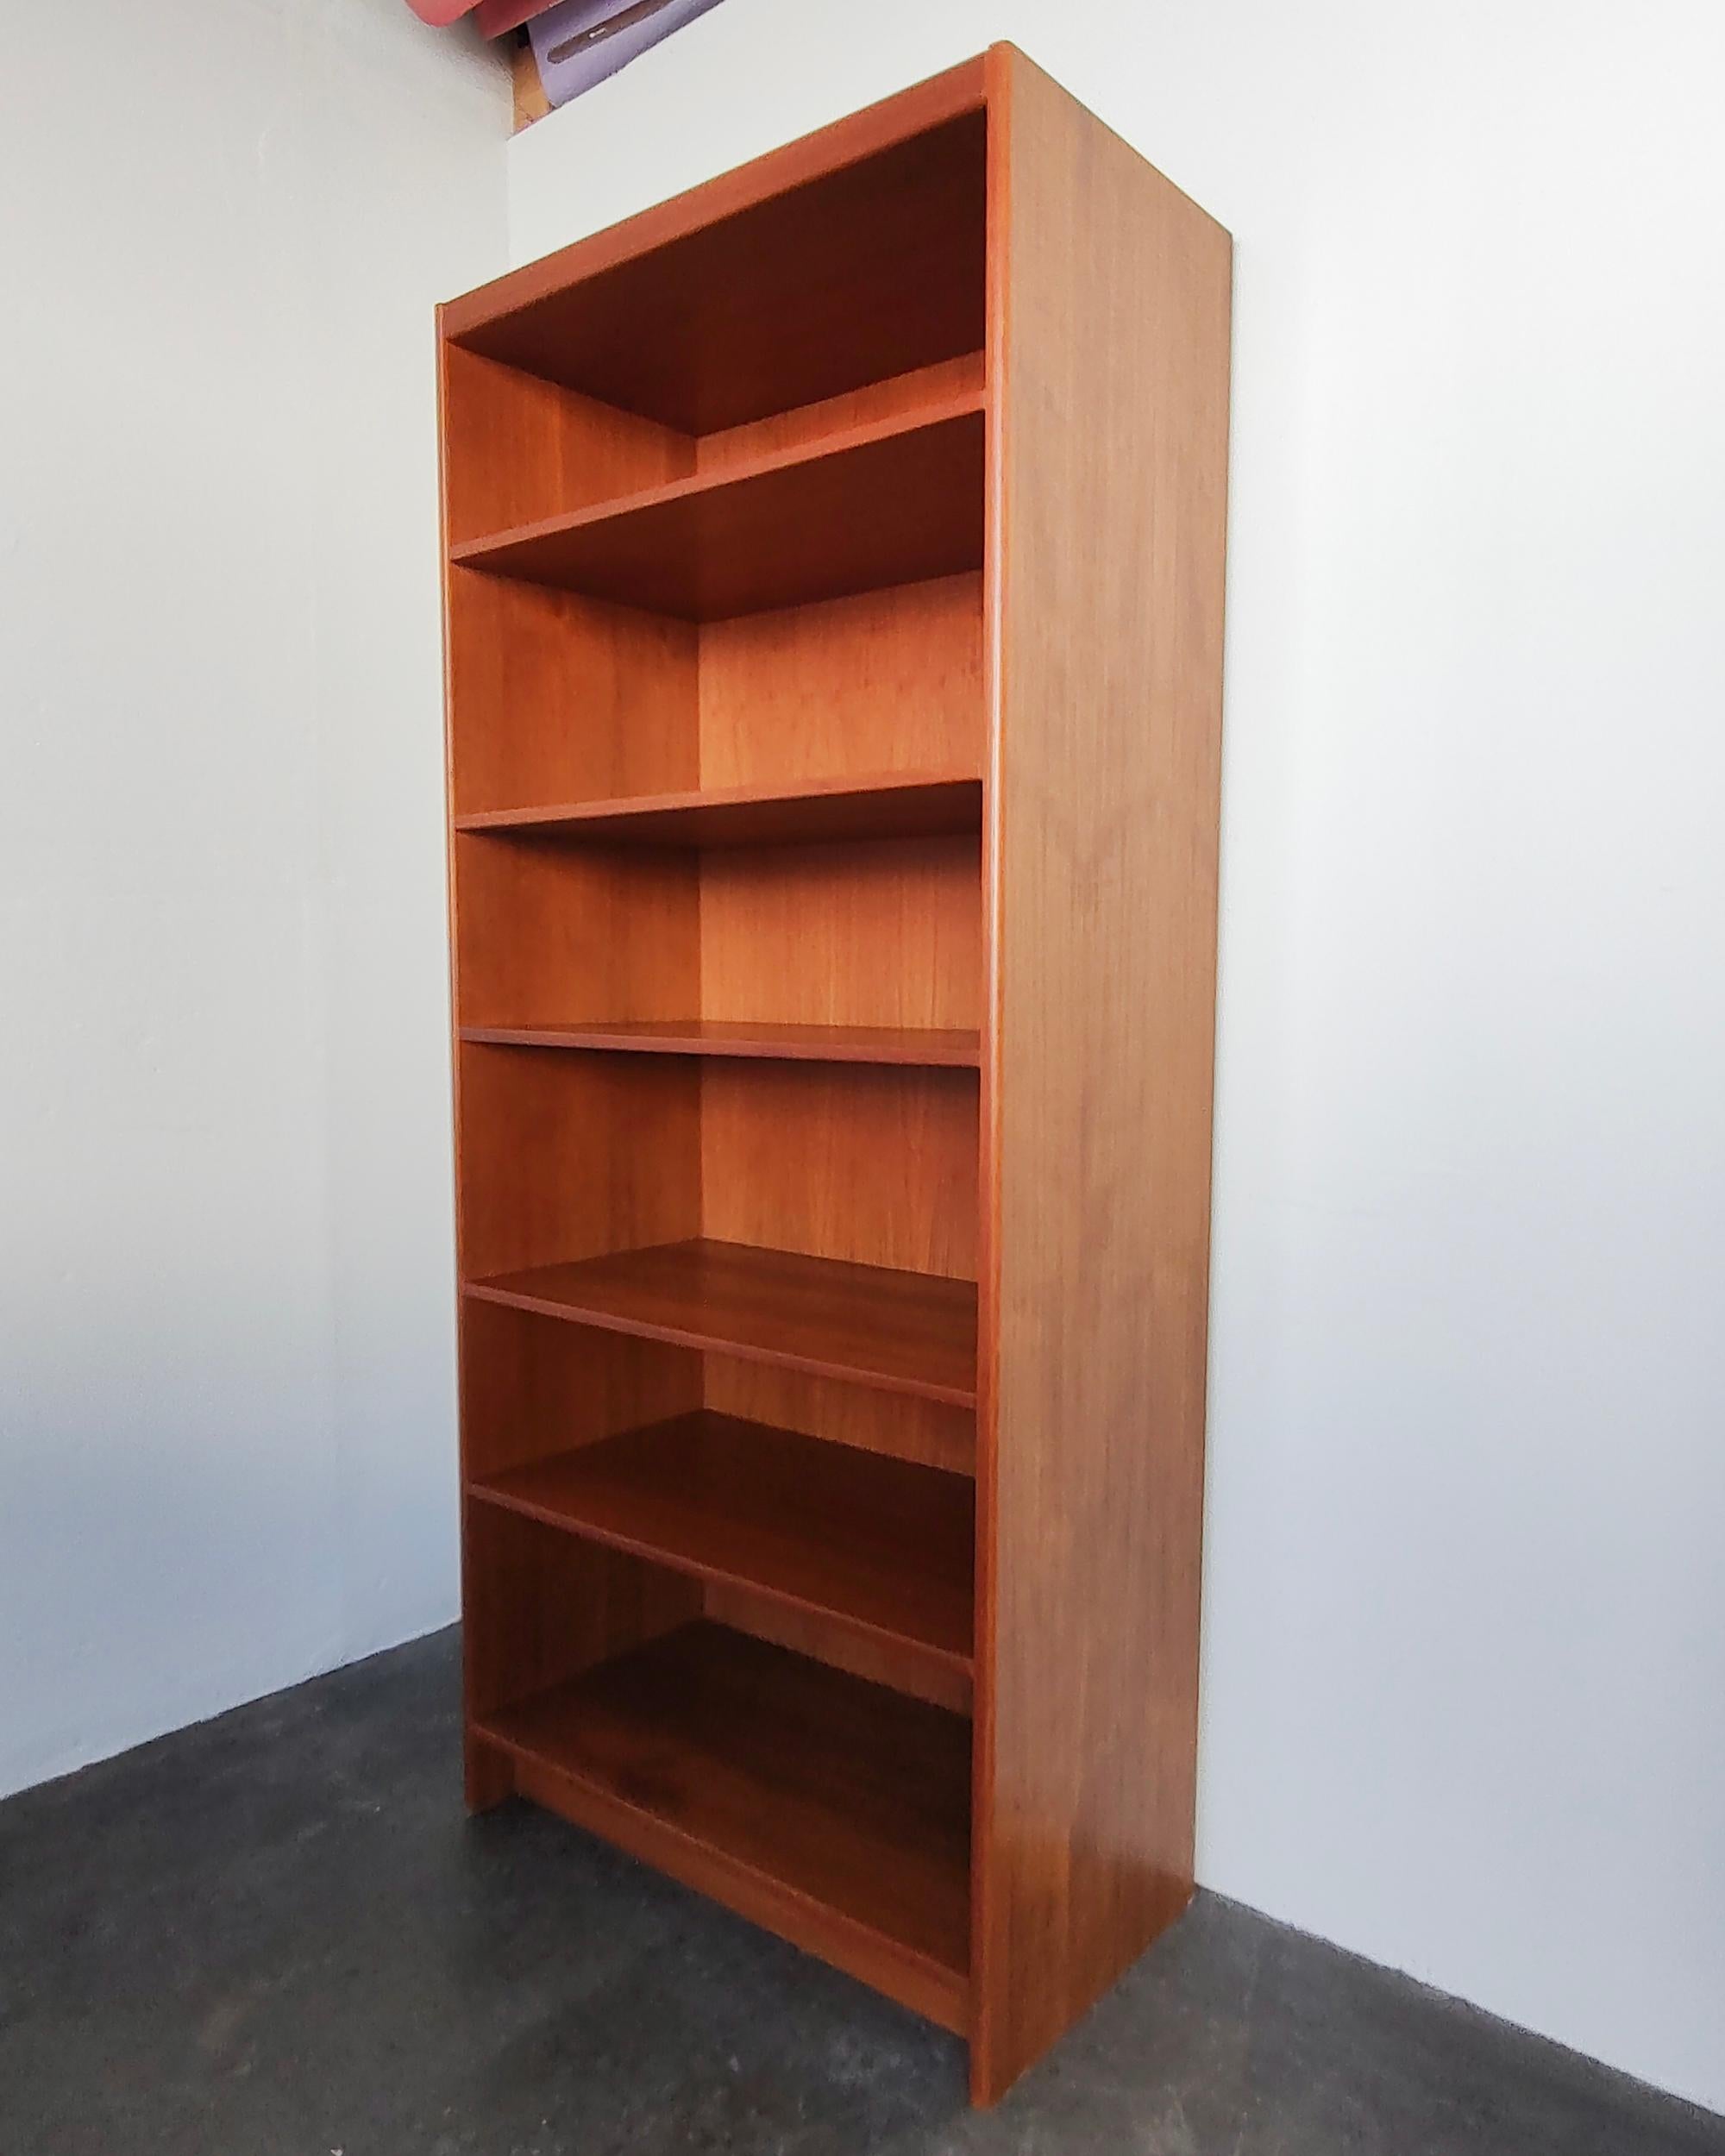 Vintage Danish modern teak wood tall shelf. Six shelves, five of which are adjustable. Overall great original condition, some light wear present consistent with vintage age. If the shelves are rearranged from the current positions there may be lines